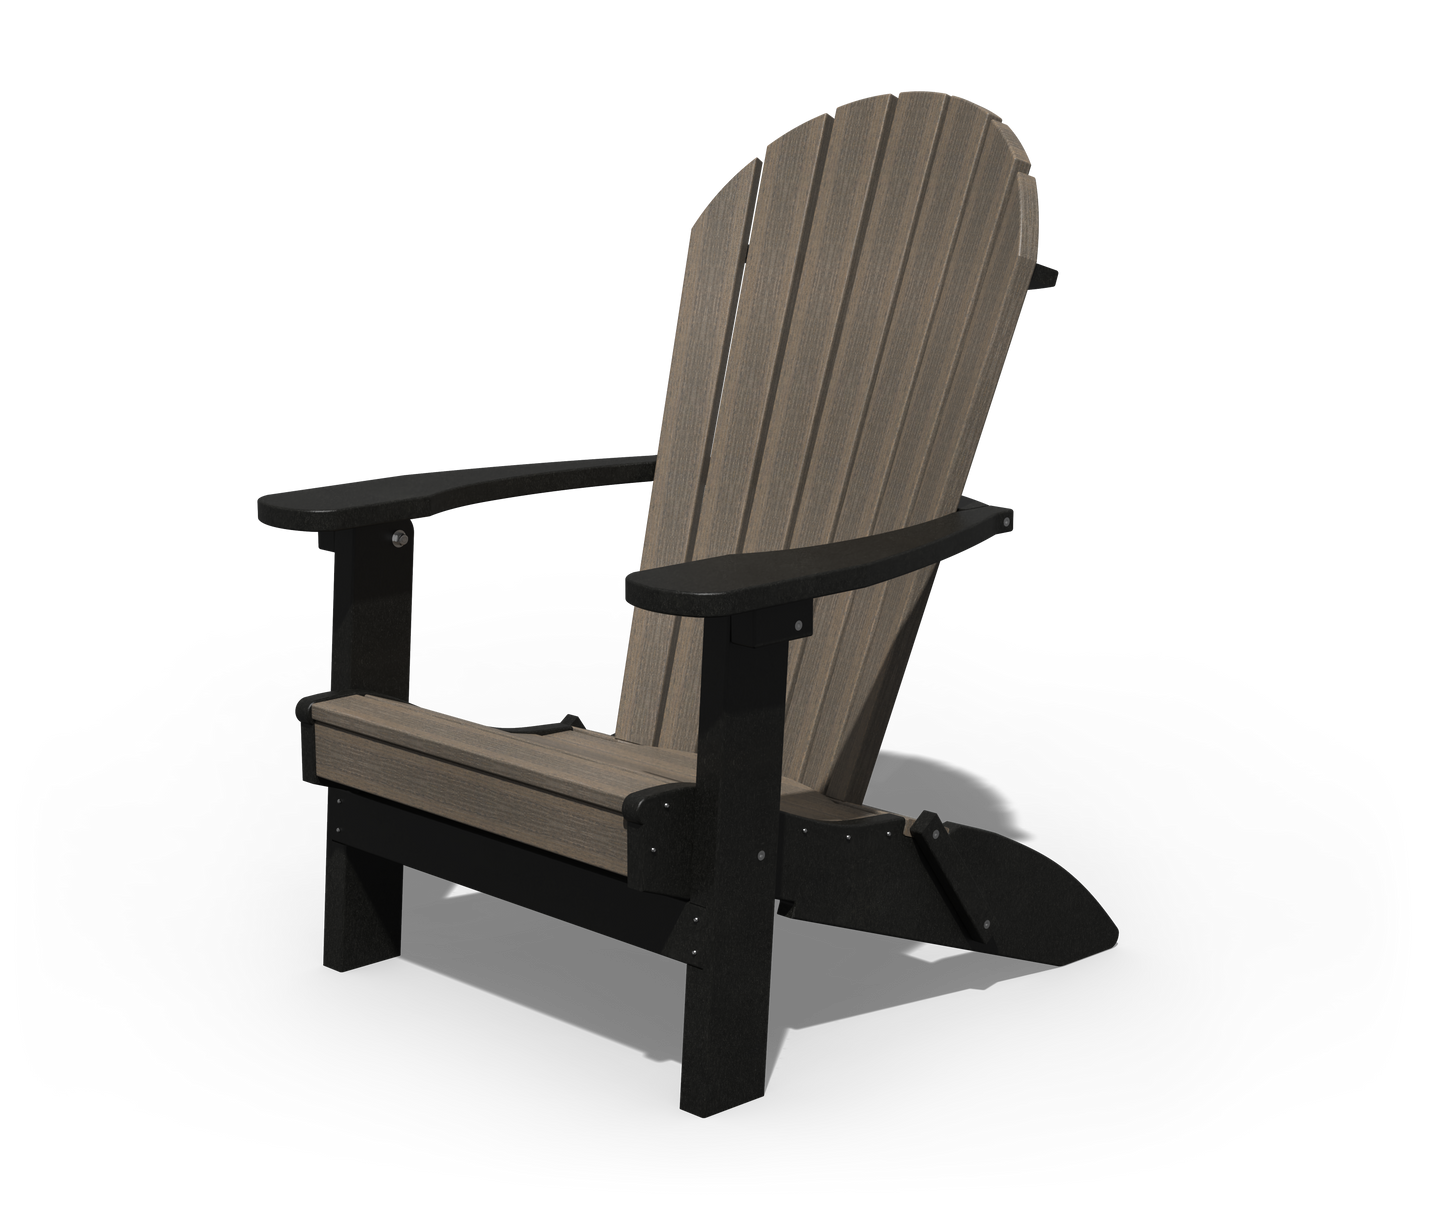 Patiova Recycled Plastic Amish Crafted Adirondack Folding Chair - LEAD TIME TO SHIP 3 WEEKS